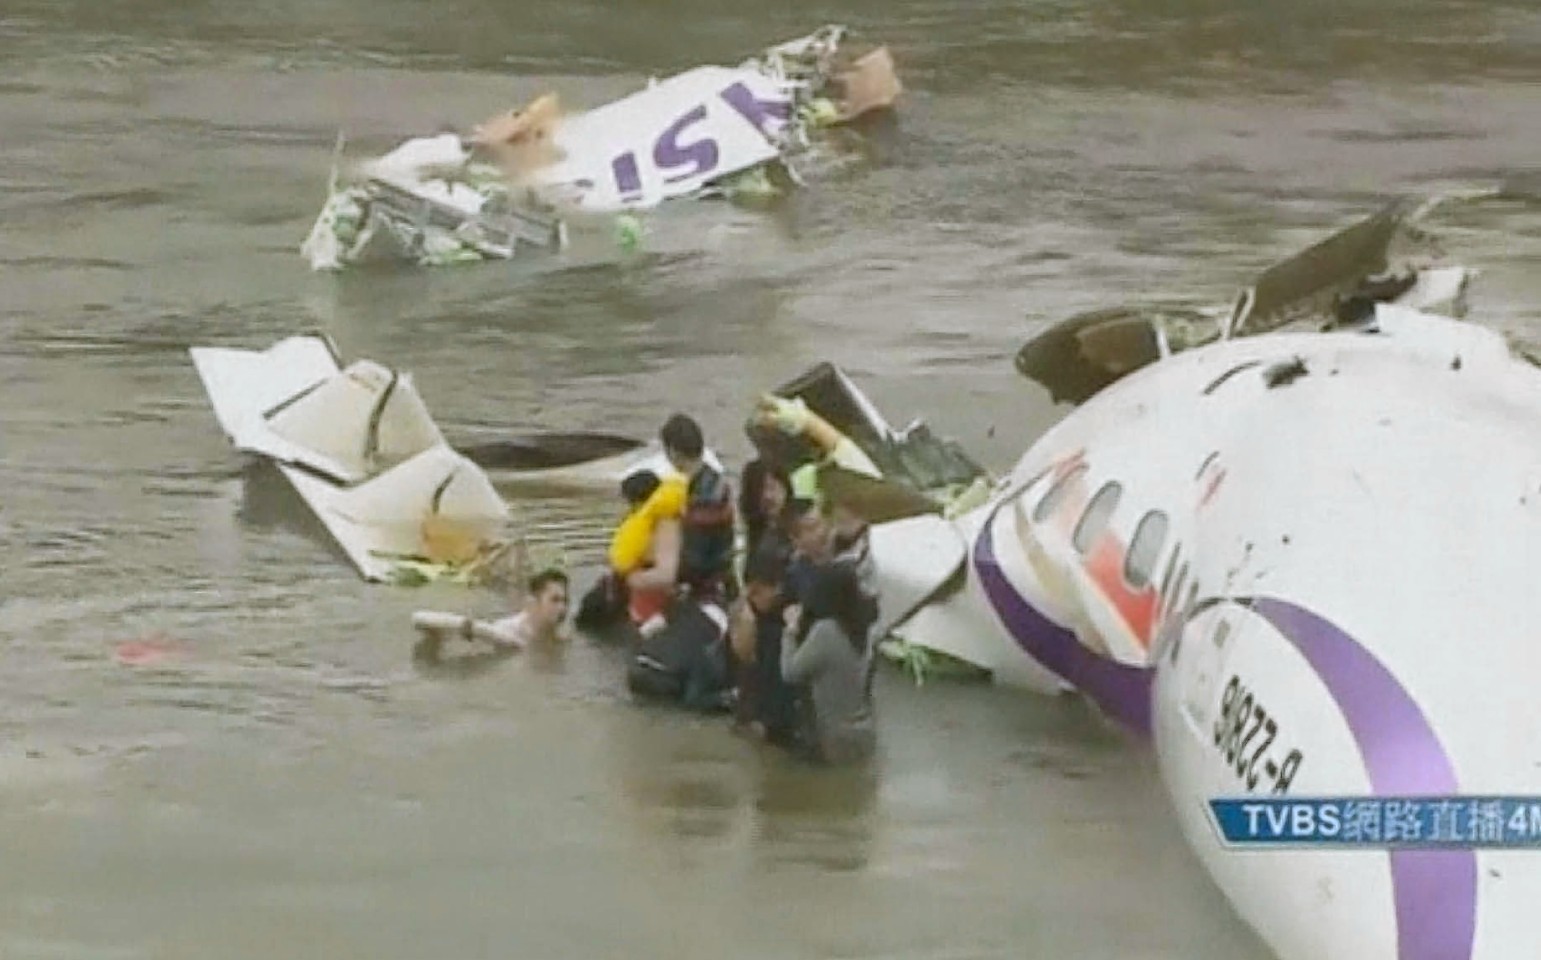 The child is rescued from the plane after it crashed into the river